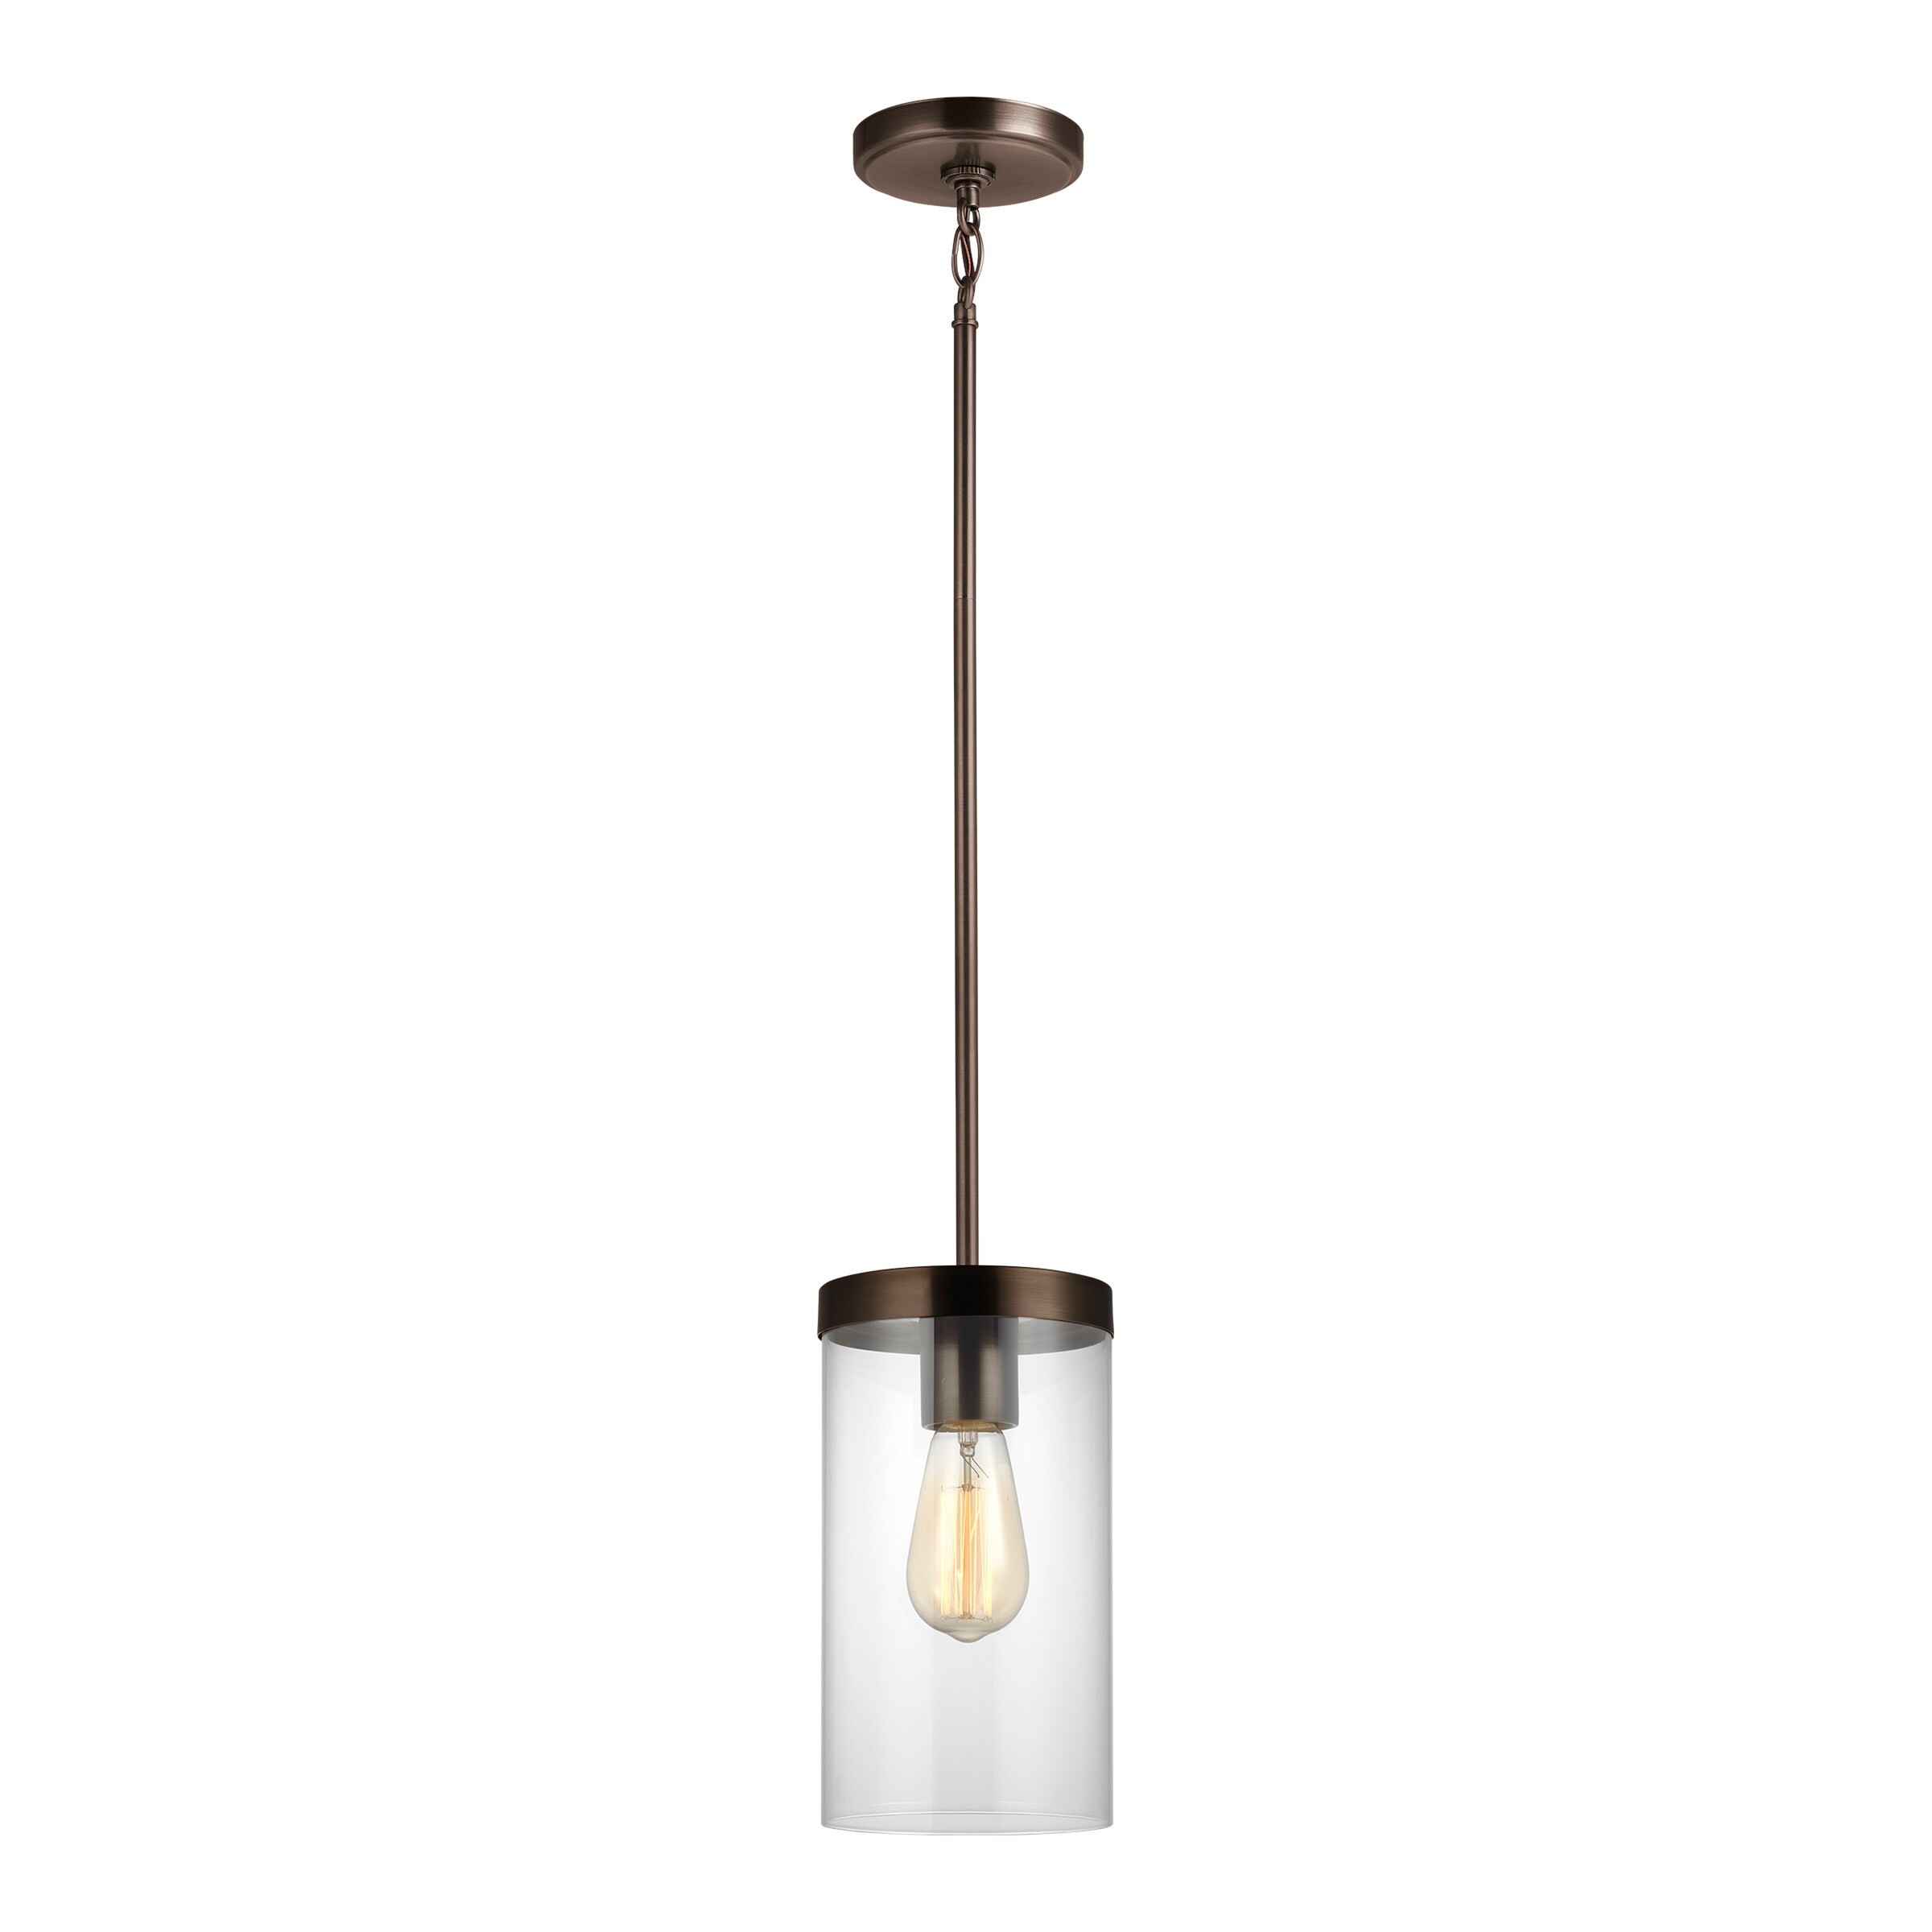 Sea Gull Lighting Zire Brushed Oil Rubbed Bronze Modern/Contemporary Clear Glass Cylinder Mini Pendant Light